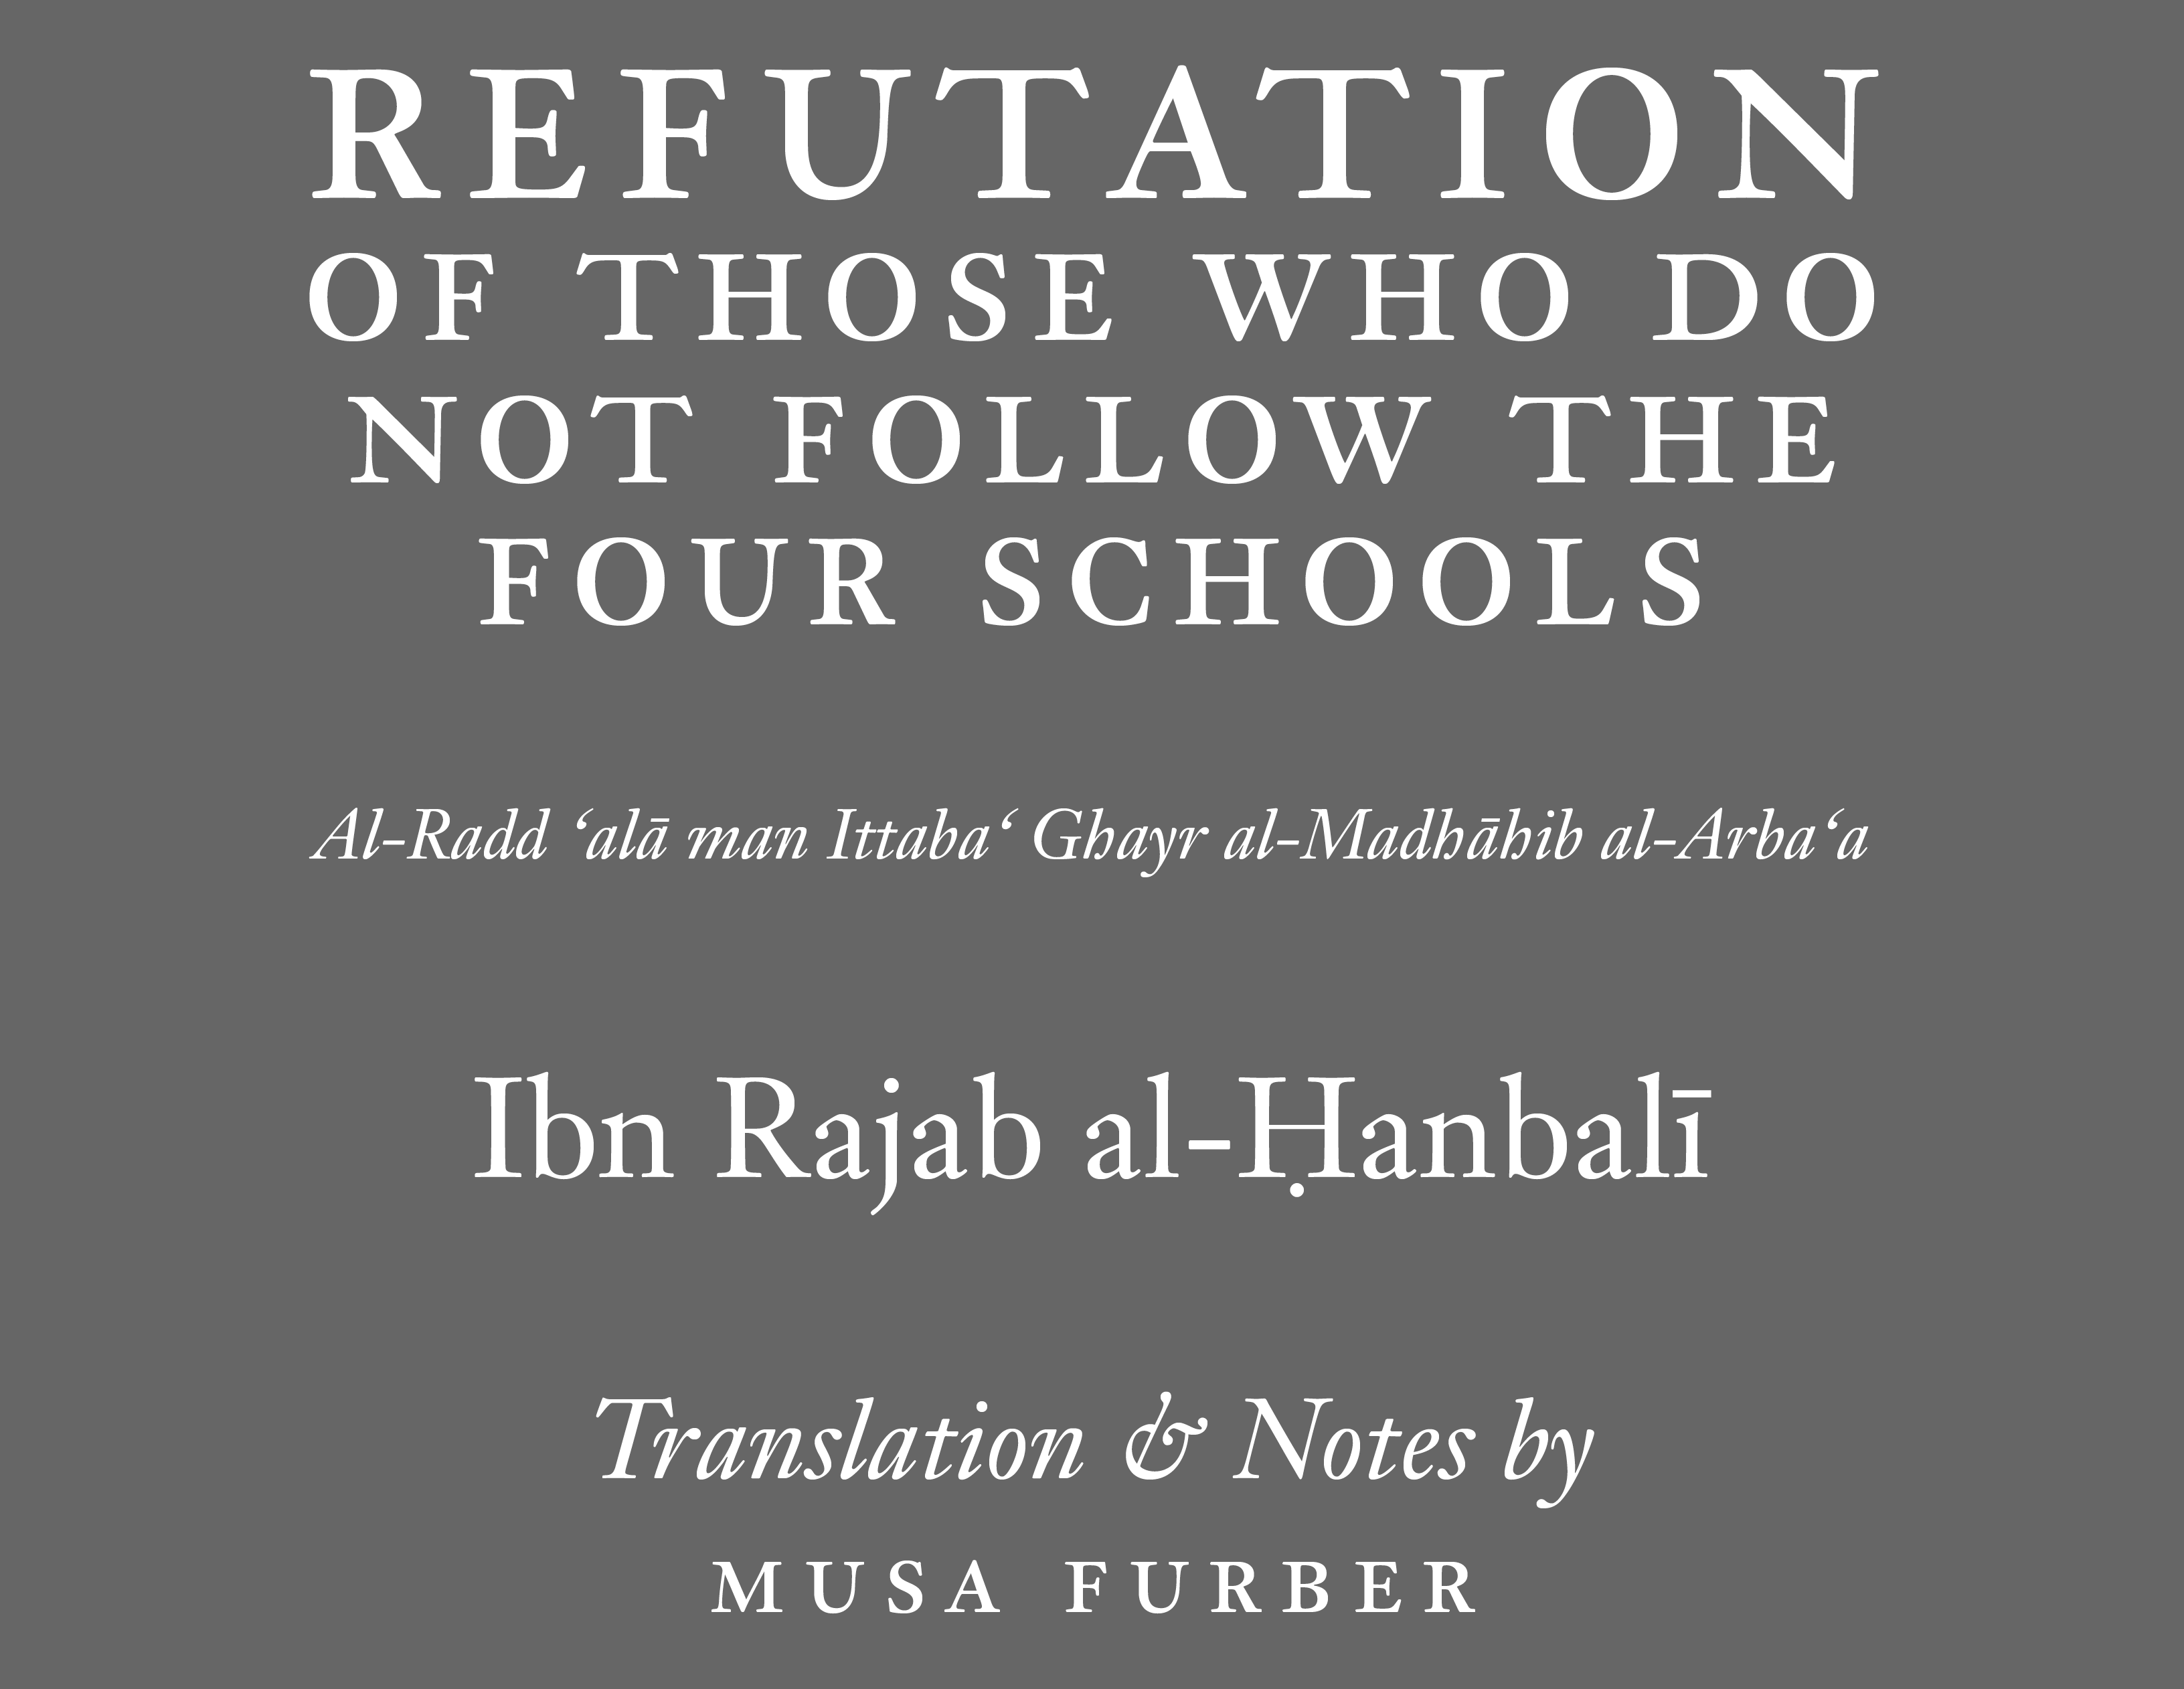 Ibn Rajab’s Refutation of Those Who Do Not Follow The Four Schools